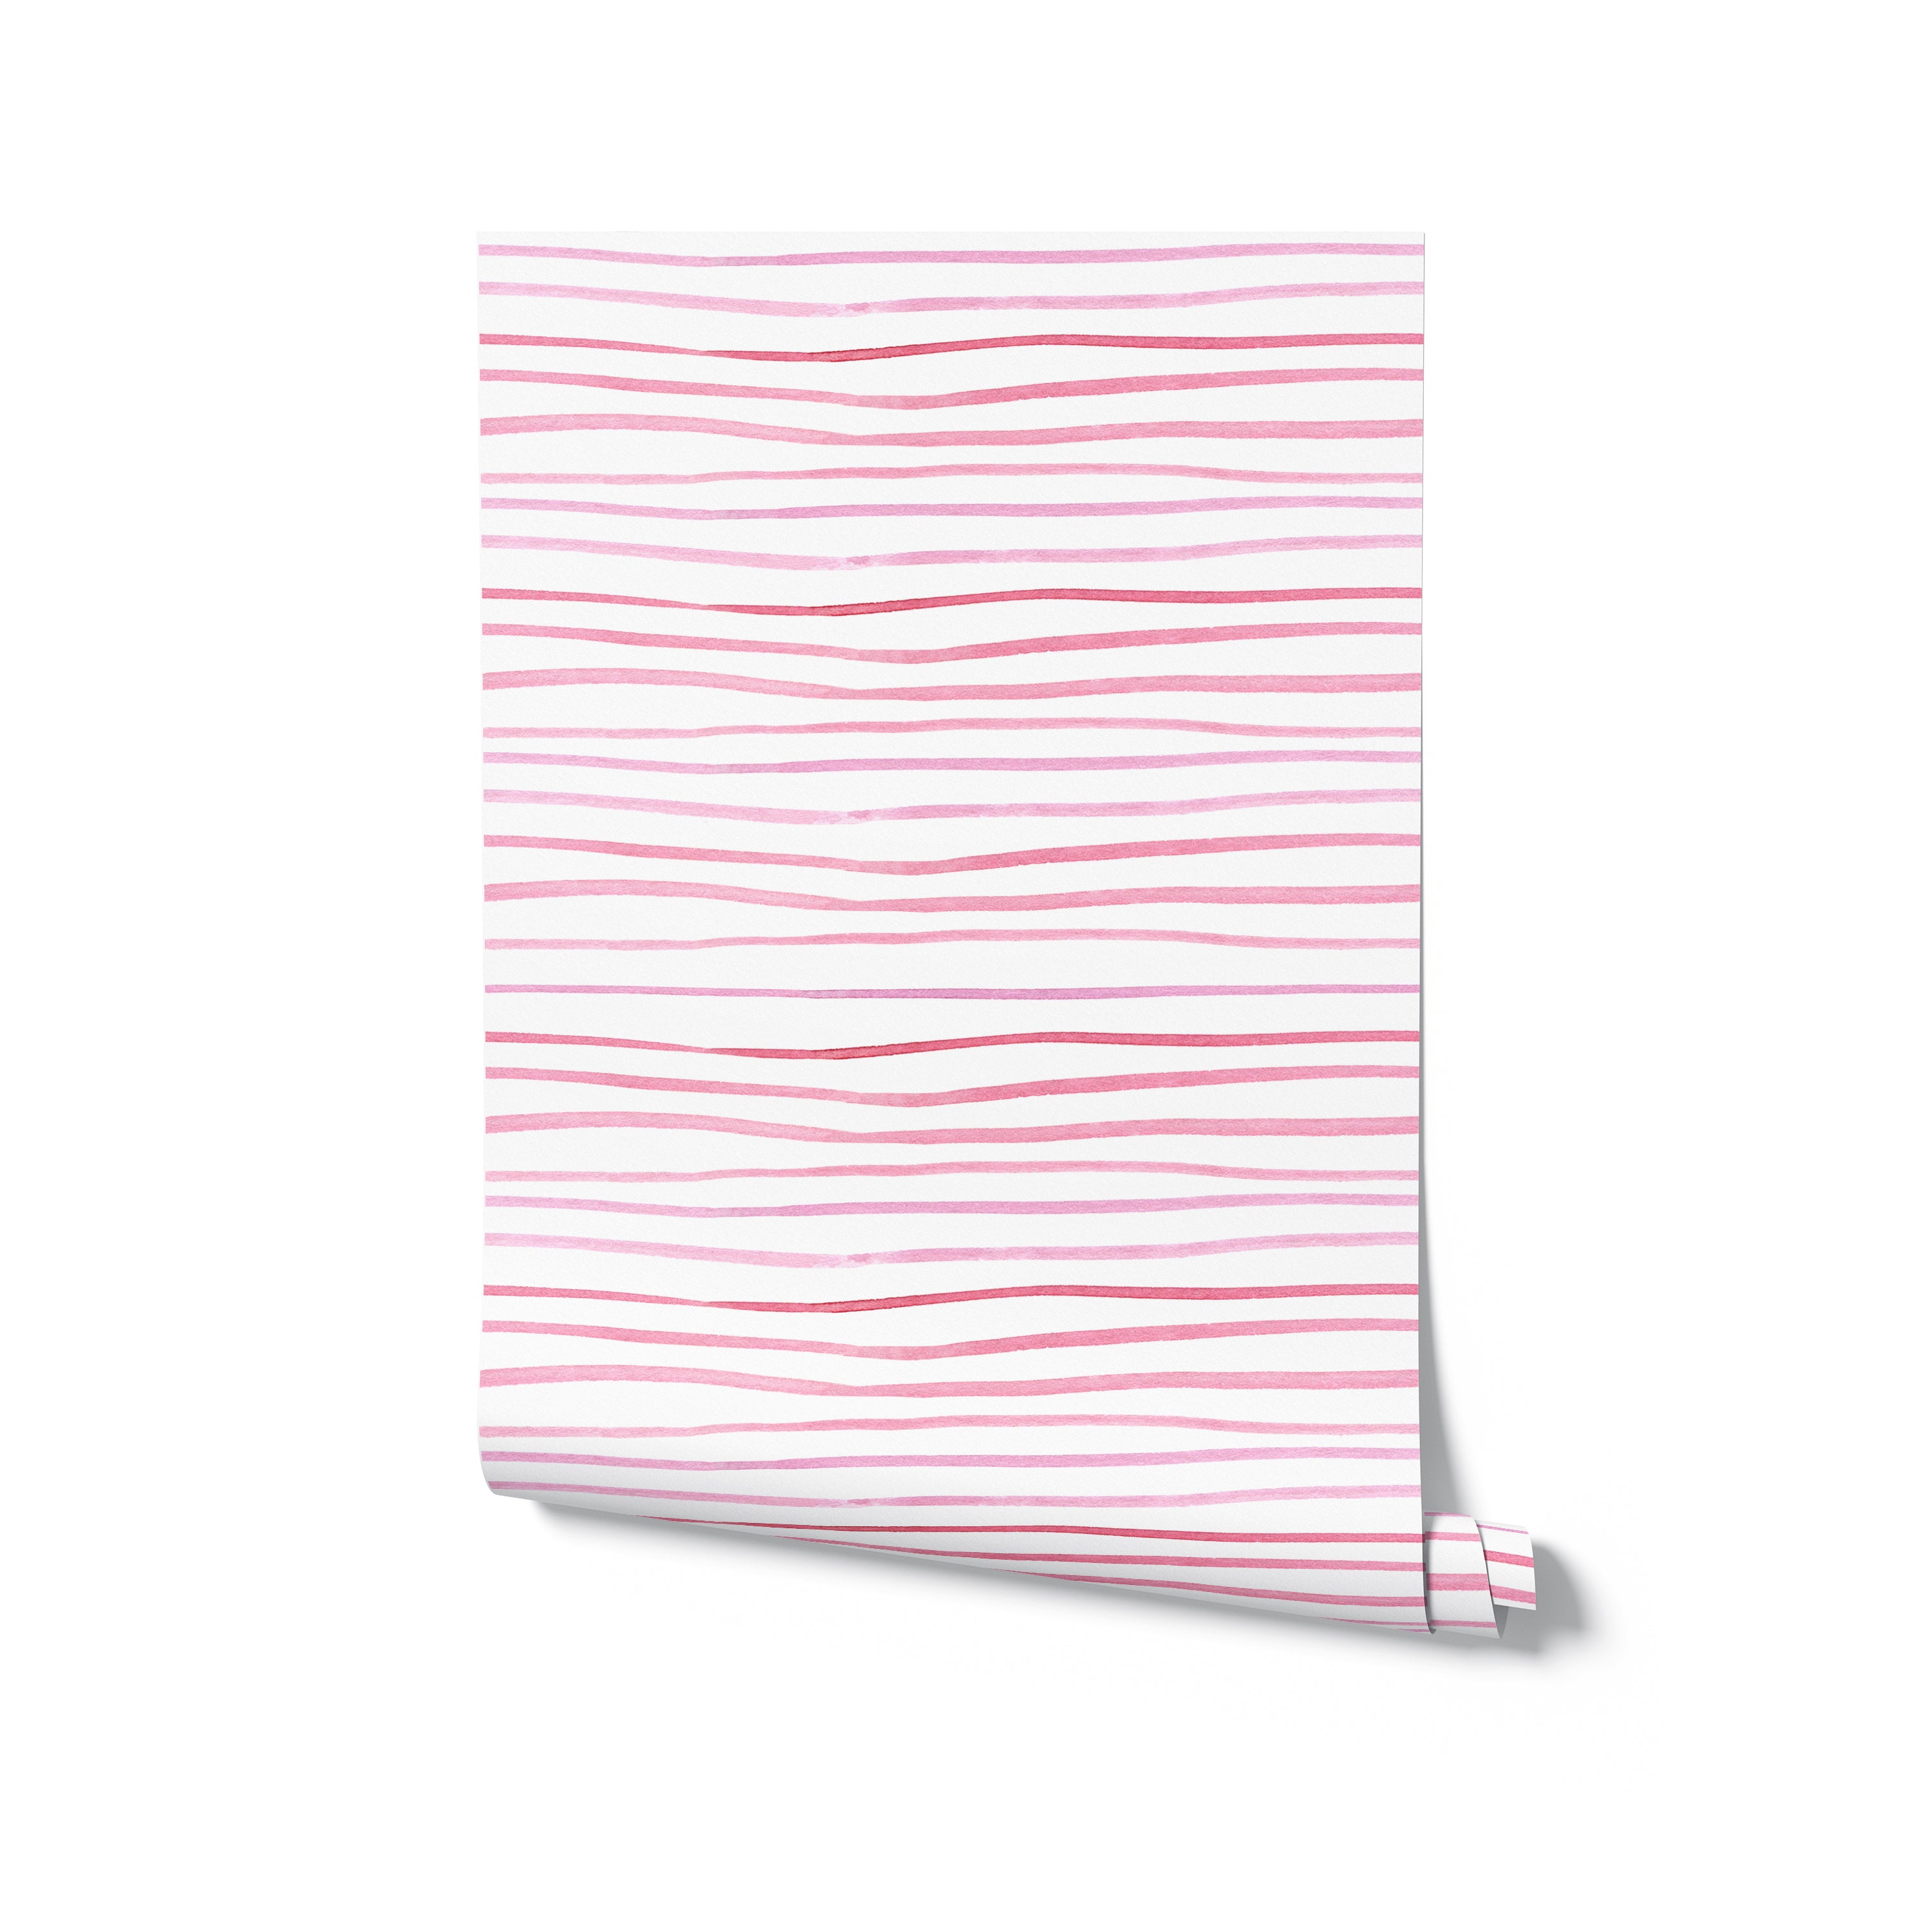 A roll of wallpaper featuring minimalistic pink brush stroke lines on a white background, perfect for adding a subtle pop of color to any room